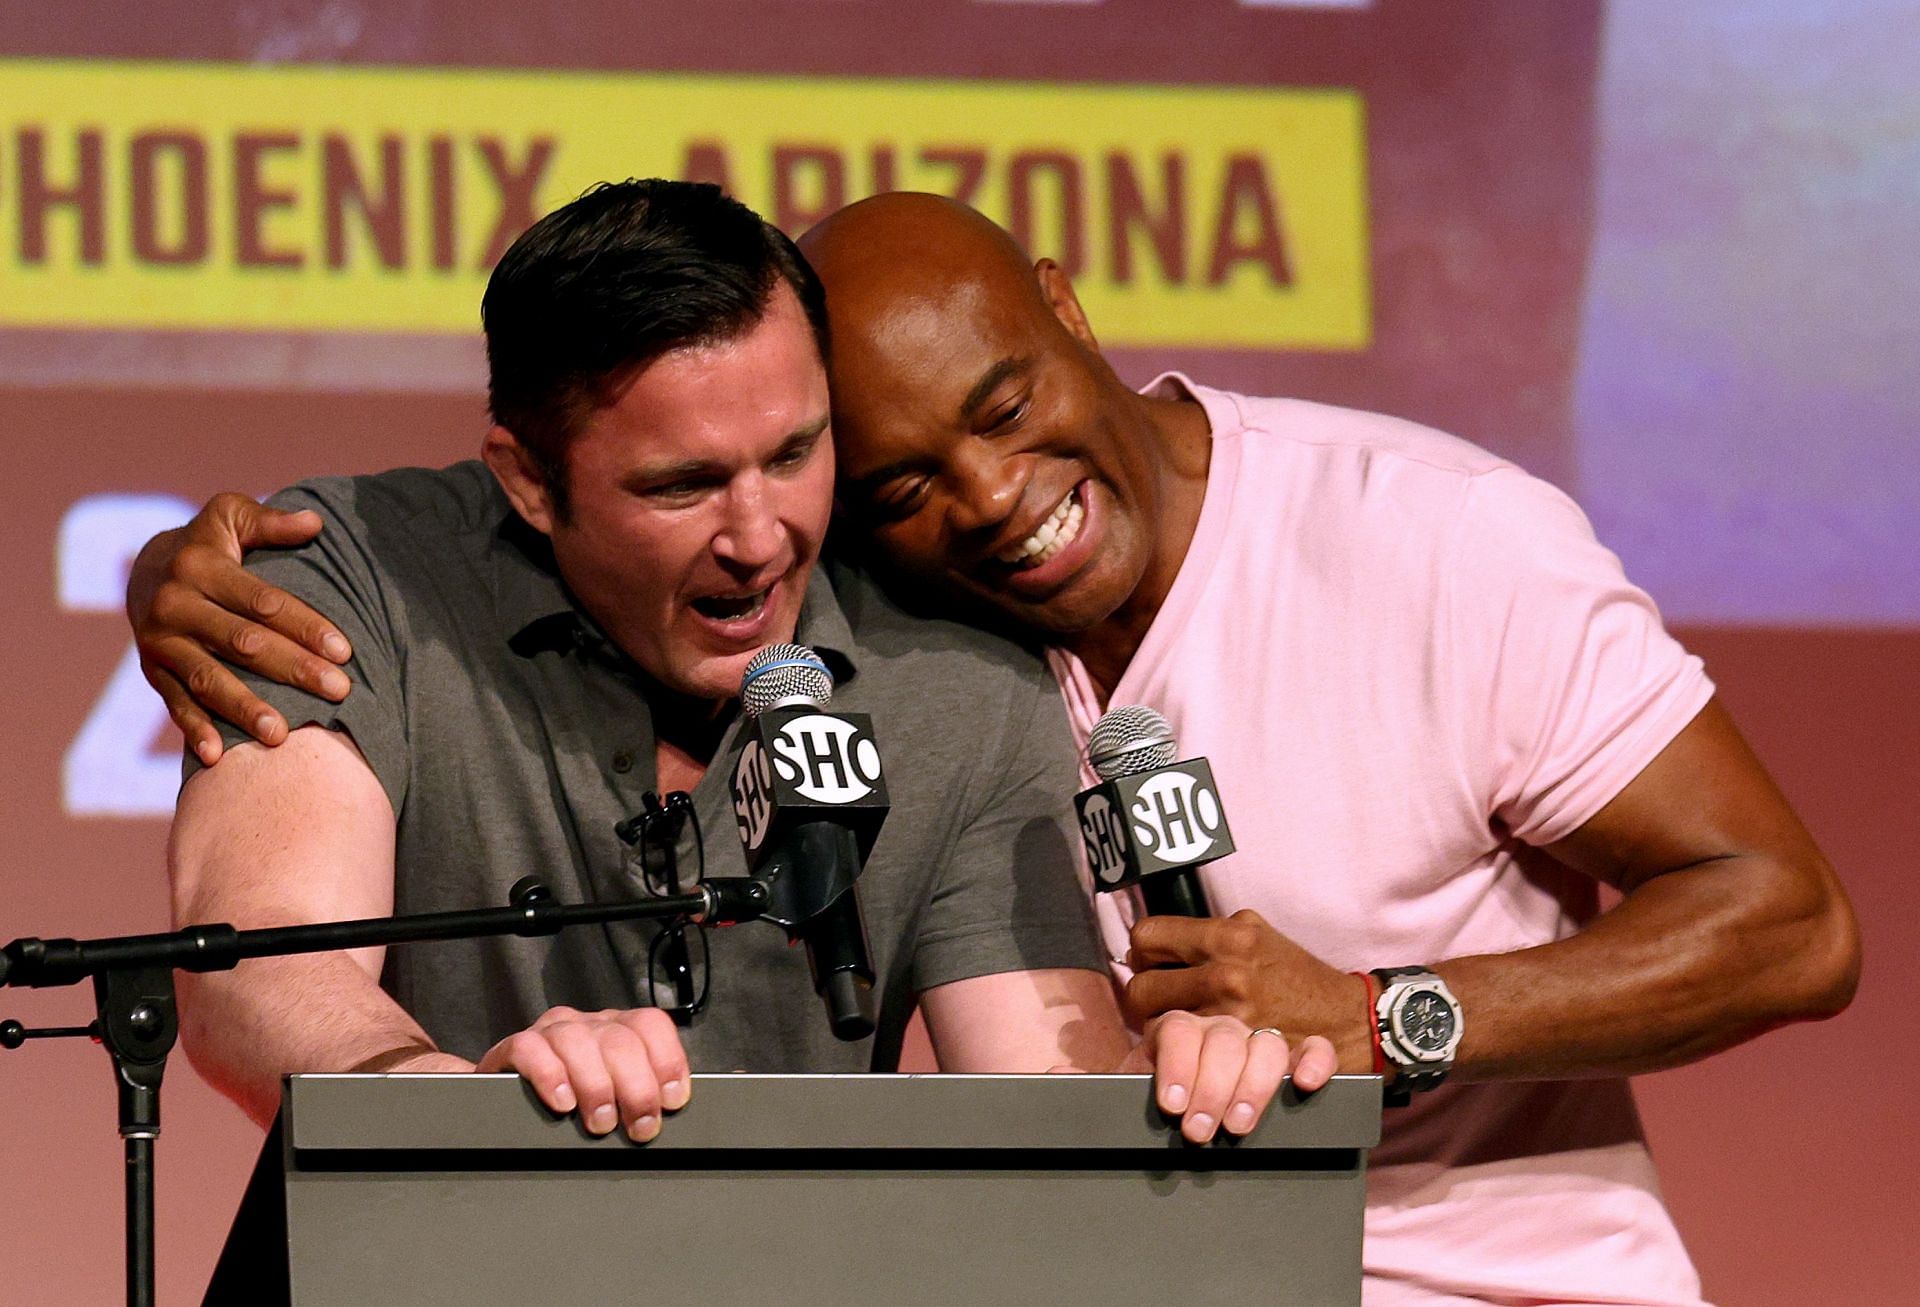 Chael Sonnen snatched defeat from the jaws of victory against his rival Anderson Silva